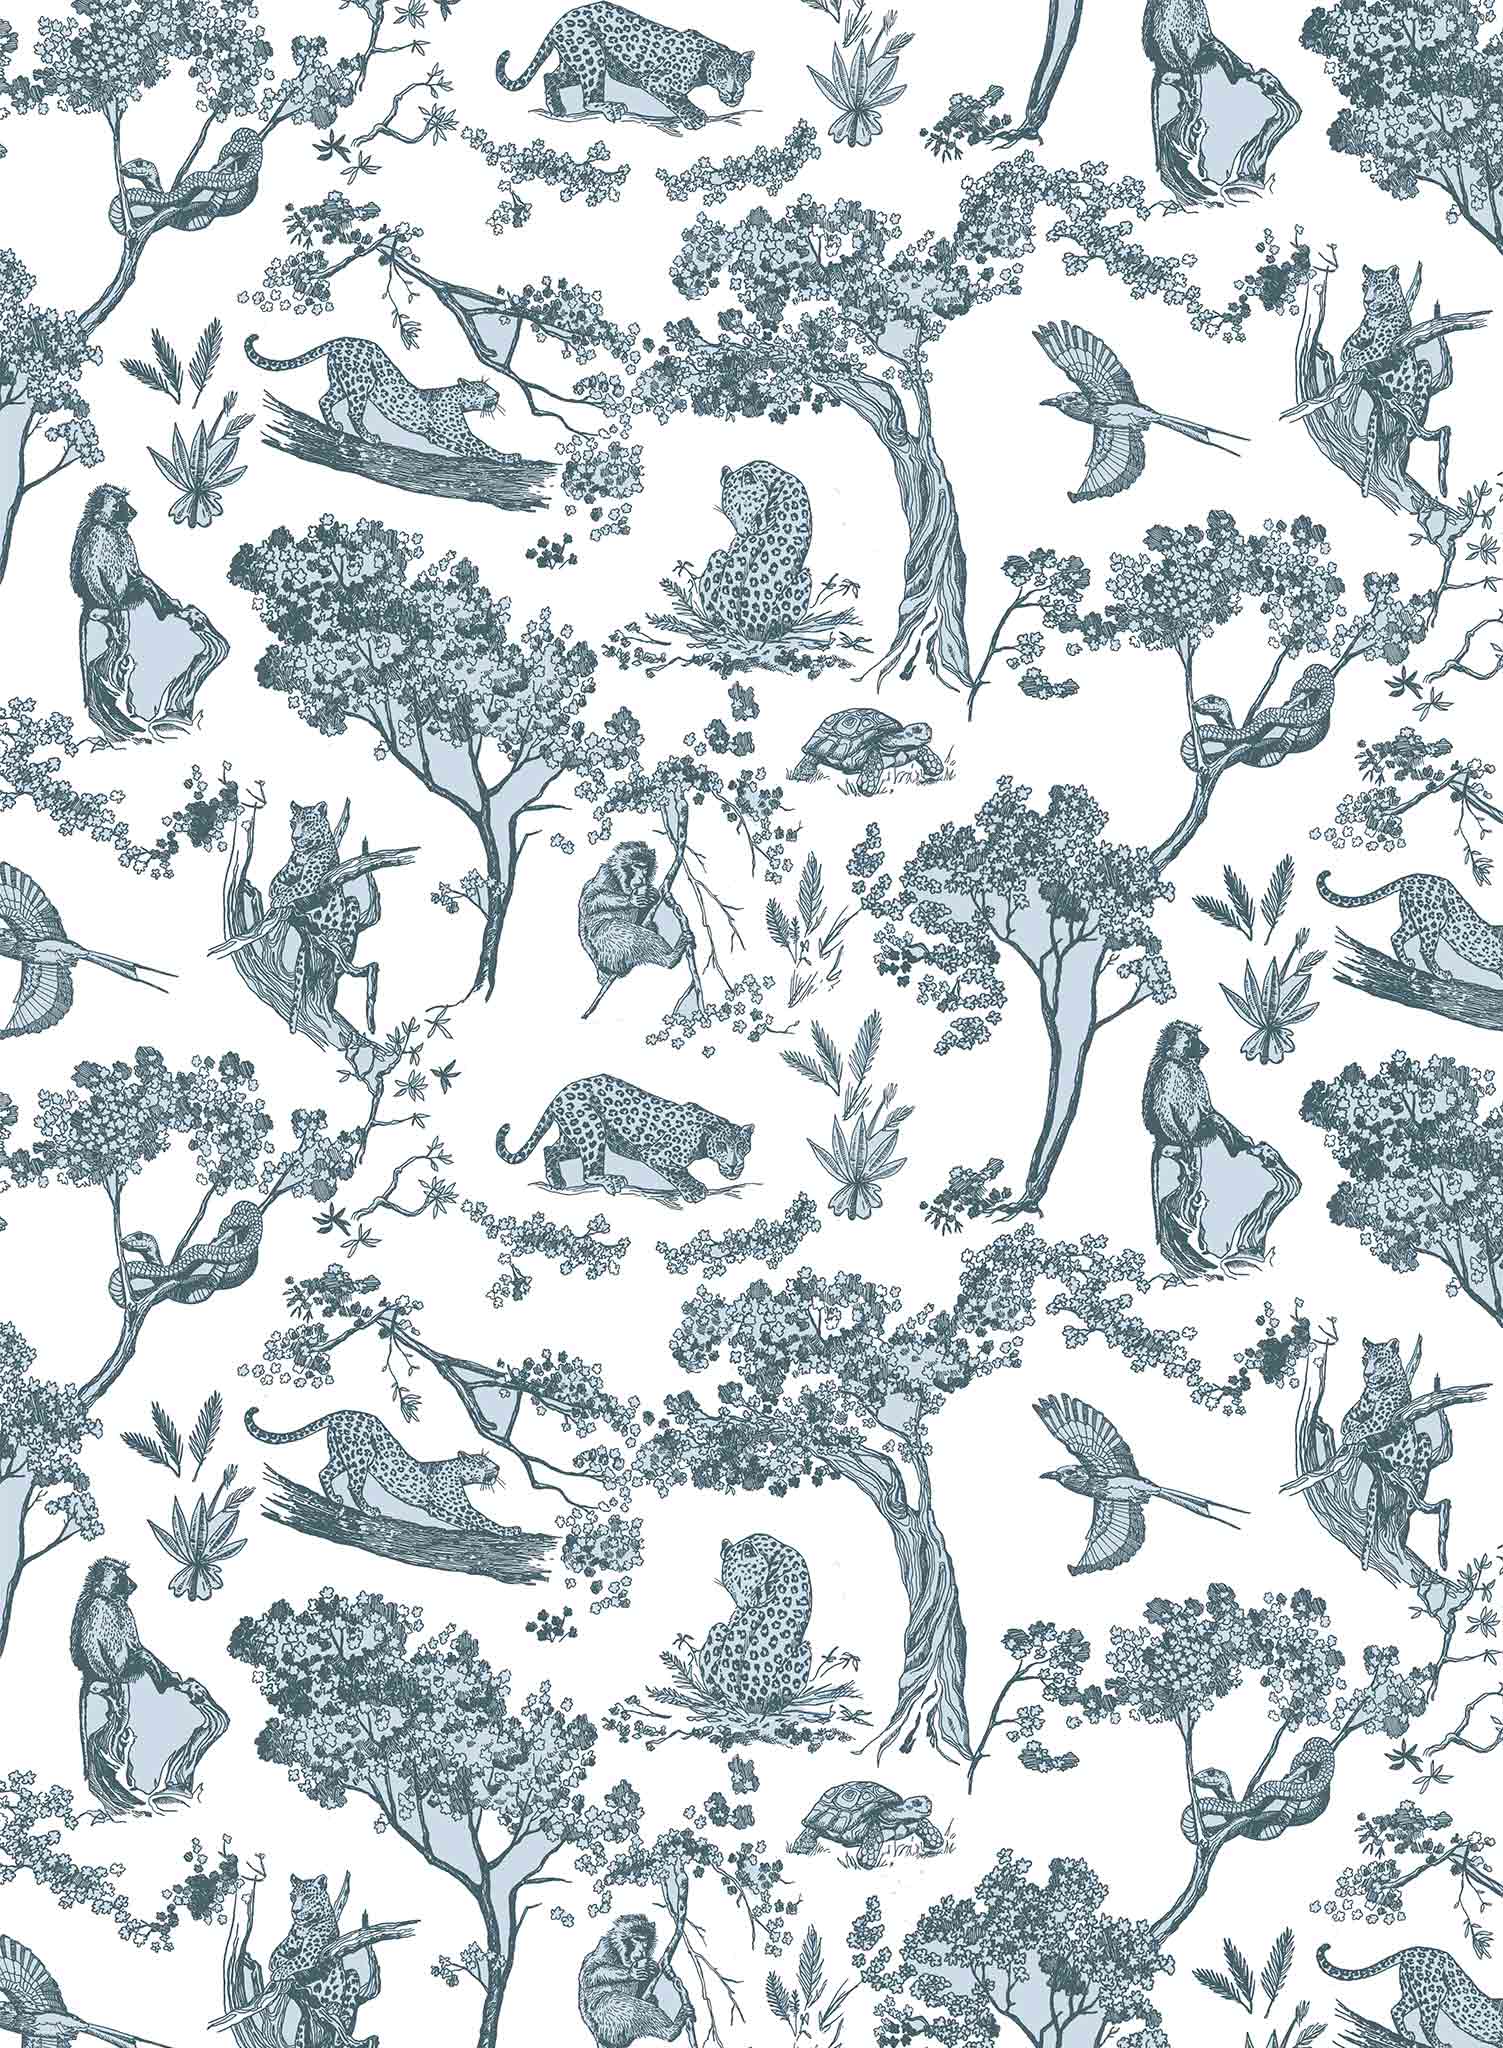 Underwood is a minimalist wallpaper by Opposite Wall of various animals and greenery found in the jungle.